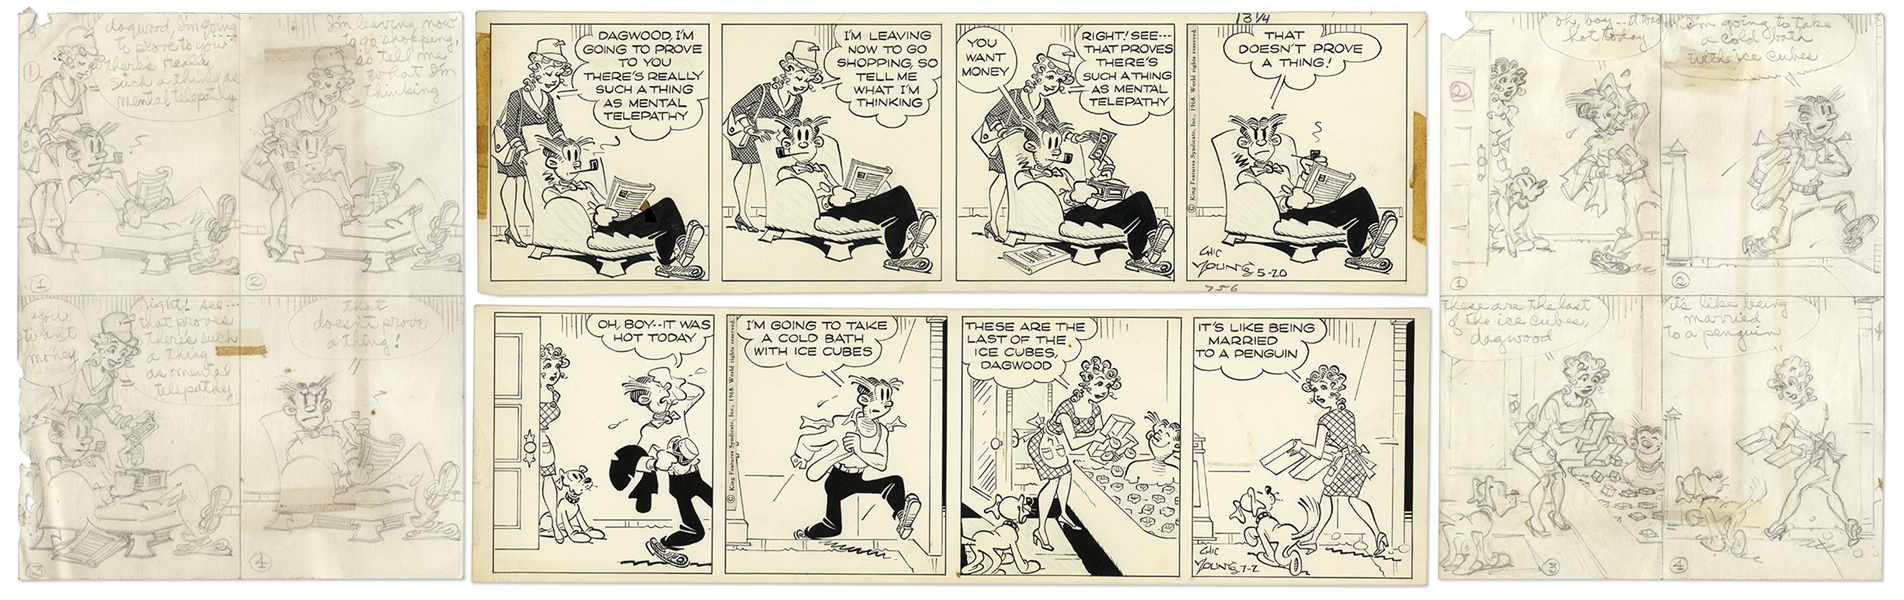 2 Chic Young Hand-Drawn ''Blondie'' Comic Strips From 1968 -- Plus Chic Young's Original Artwork for Both Strips